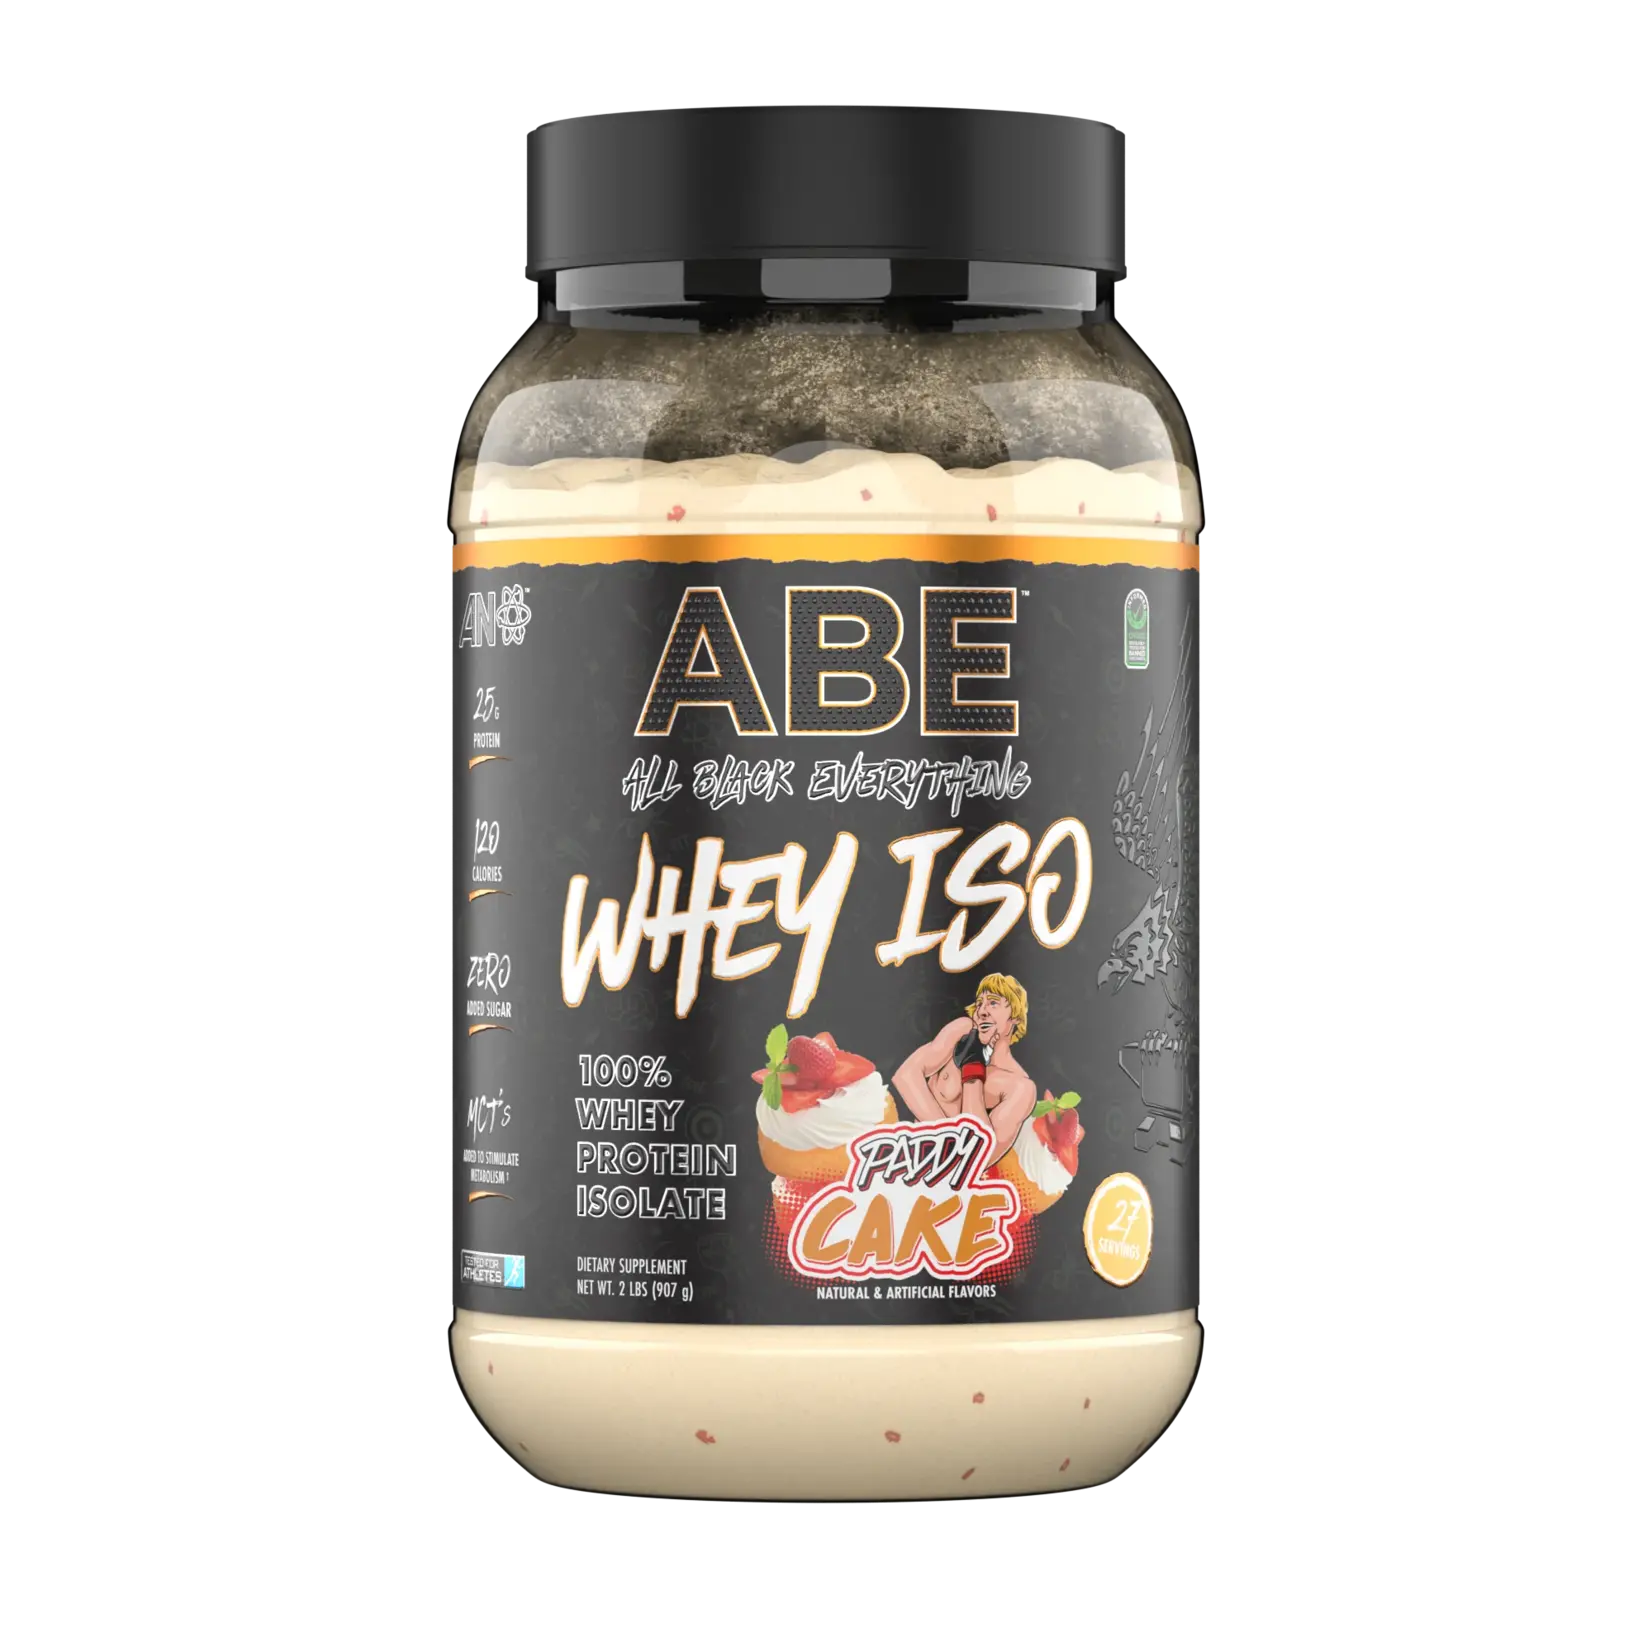 Applied Nutrition ABE Whey Iso